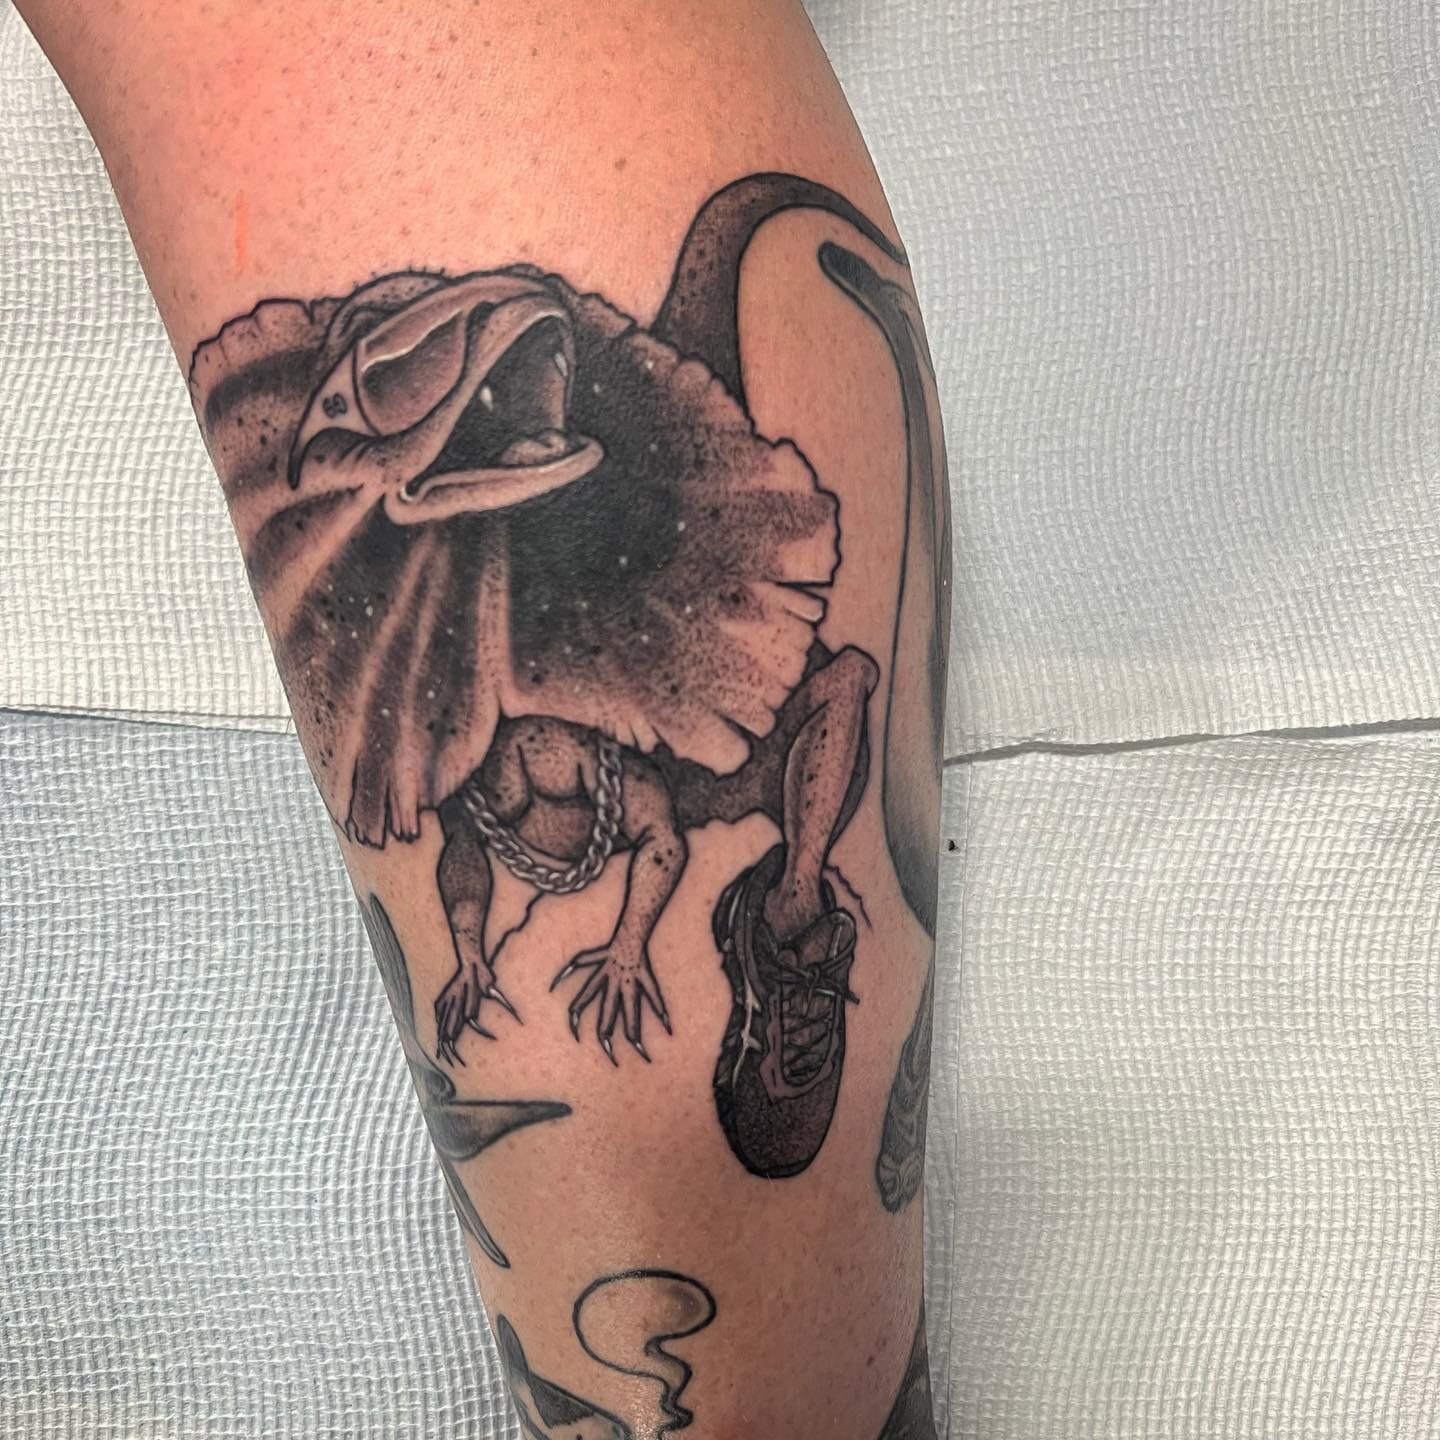 Another one (Dj Khaled&rsquo;s voice☝️). Thanks once again @hotchka for heading down, always a pleasure. 
Dm to book, would love to do some more like this.